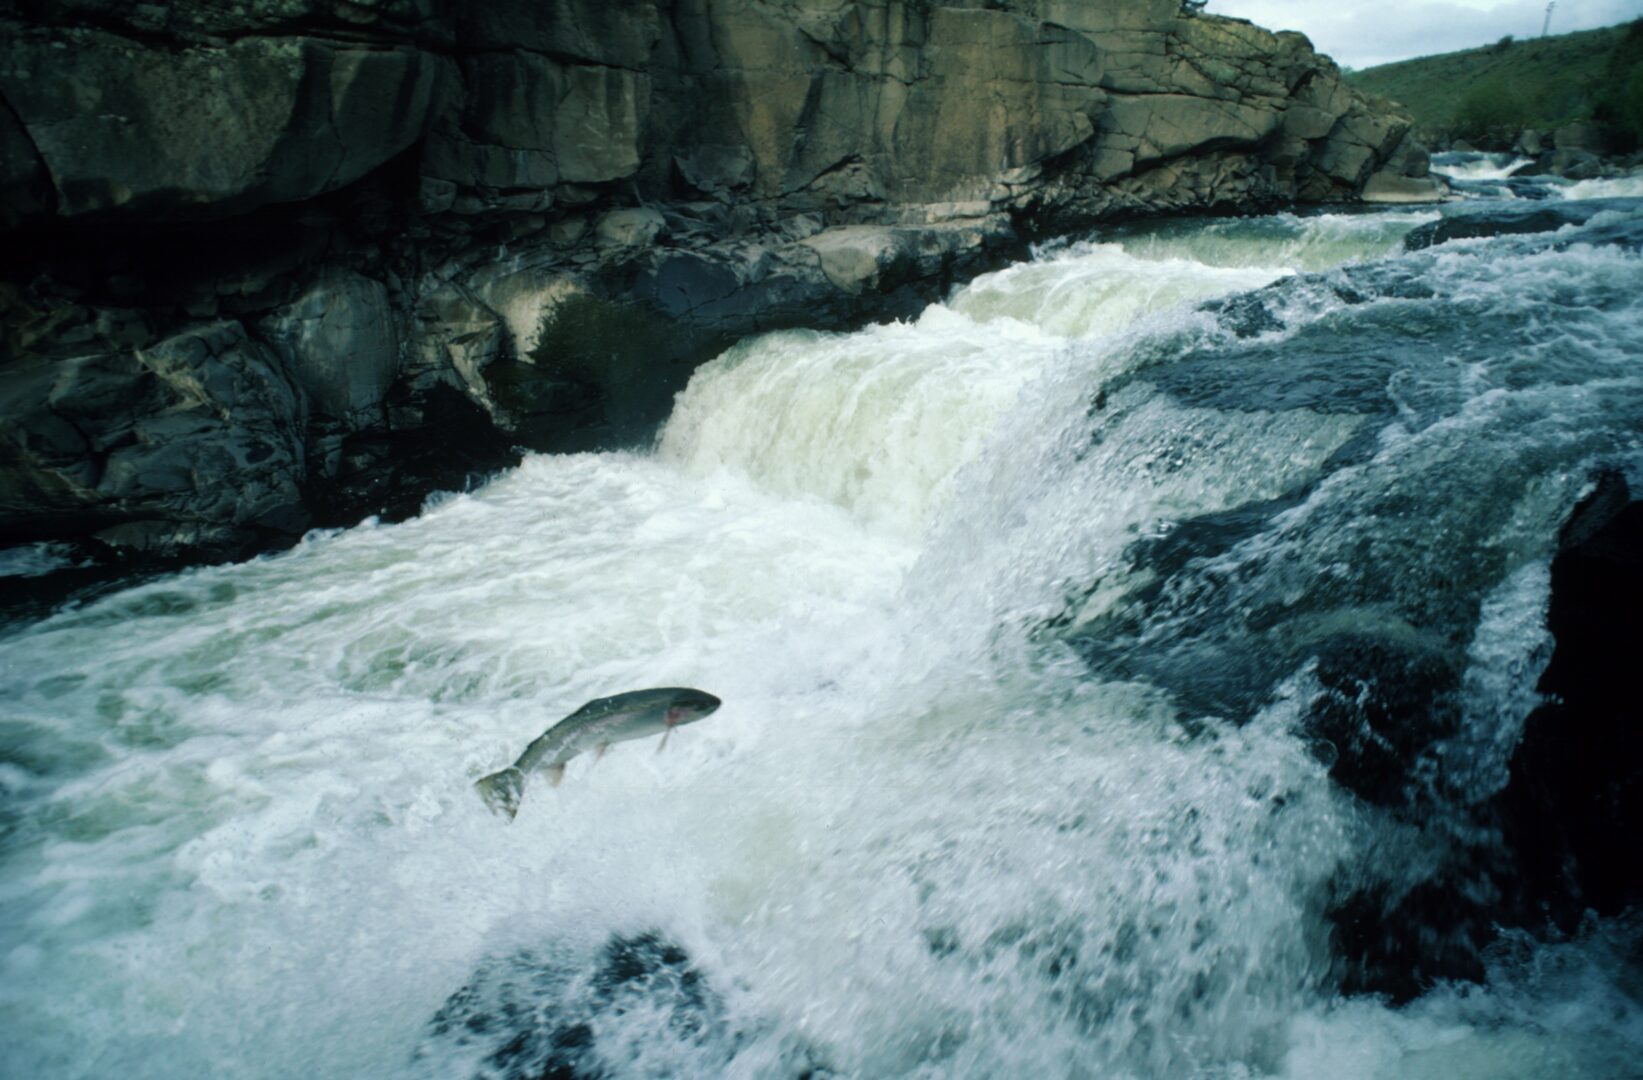 Salmon jump out of the water and make their way up a water fall.